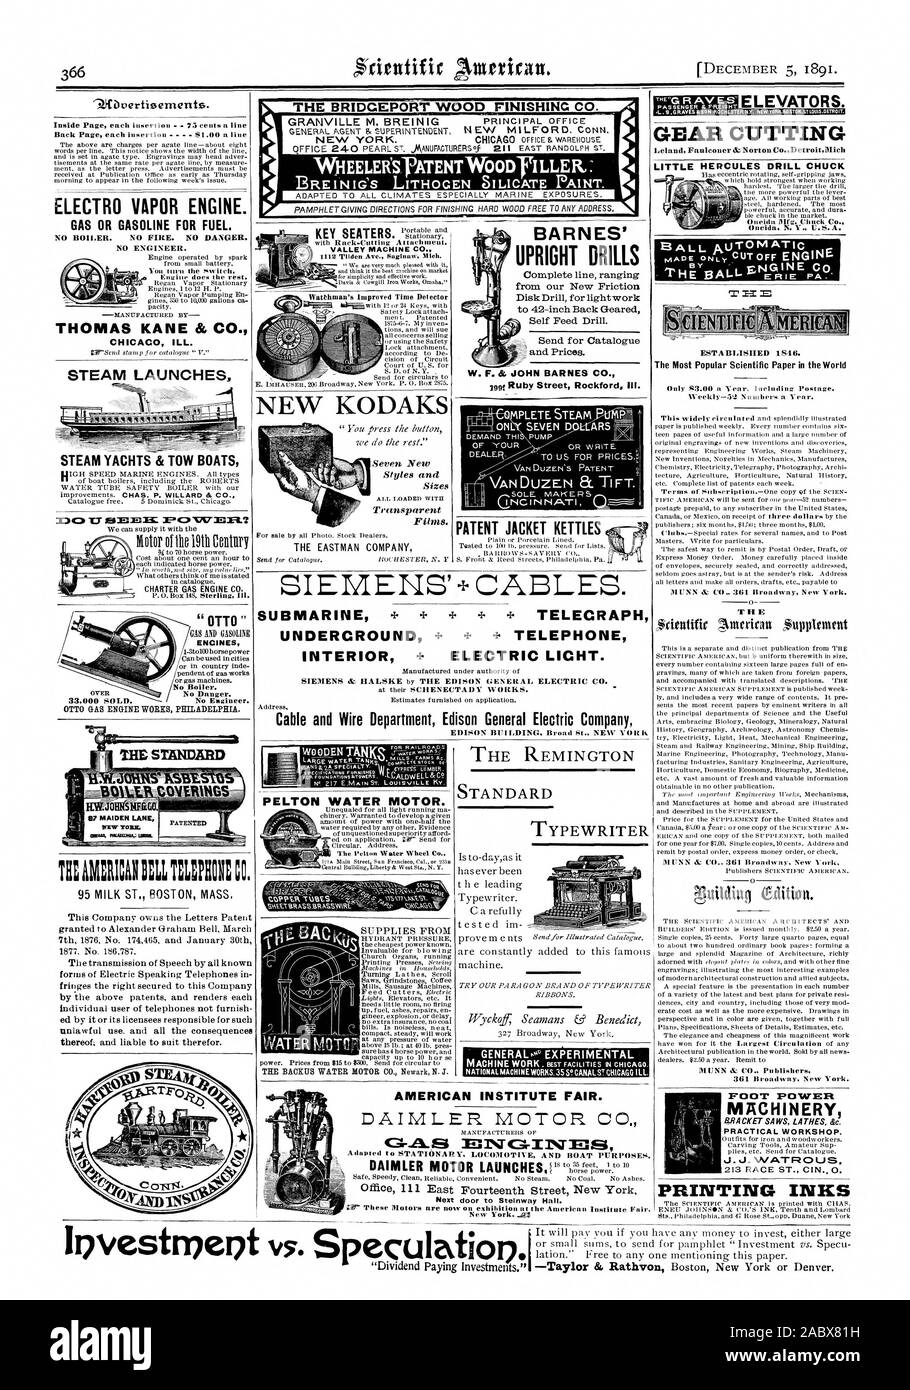 THE BRIDGEPORT WOOD FINISHING CO. BRE I N I G'S LITHOC EN SILICATE PAINT. STEAM LAUNCHES. STEAM YACHTS & TOW BOATS THAM:RICAII:ILIVPHON:CO. 95 MILK ST. BOSTON MASS. VALLEY MACHINE CO. NEW KODAKS THE EASTMAN COMPANY PELTON WATER MOTOR. GENERALo° EXPERIMENTAL ESTABLISHED 1846. H E dcutific nitericatt 55upp1entent 'Attilding MUNN & CO Publishers FOOT POWER MACHINERY SH ACK ET SAWS LATHES &c. PRACTICAL WORKSHOP. PRINTING INKS 9-Kbverti9ements. ELECTRO VAPOR ENGINE. GAS OR GASOLINE FOR FUEL. NO BOILER. NO FIRE. NO DANGER. NO ENGINEER. THOMAS KANE & CO. CHICAC ILL. GAS BD GASOLINK ENCINES OVER No Stock Photo